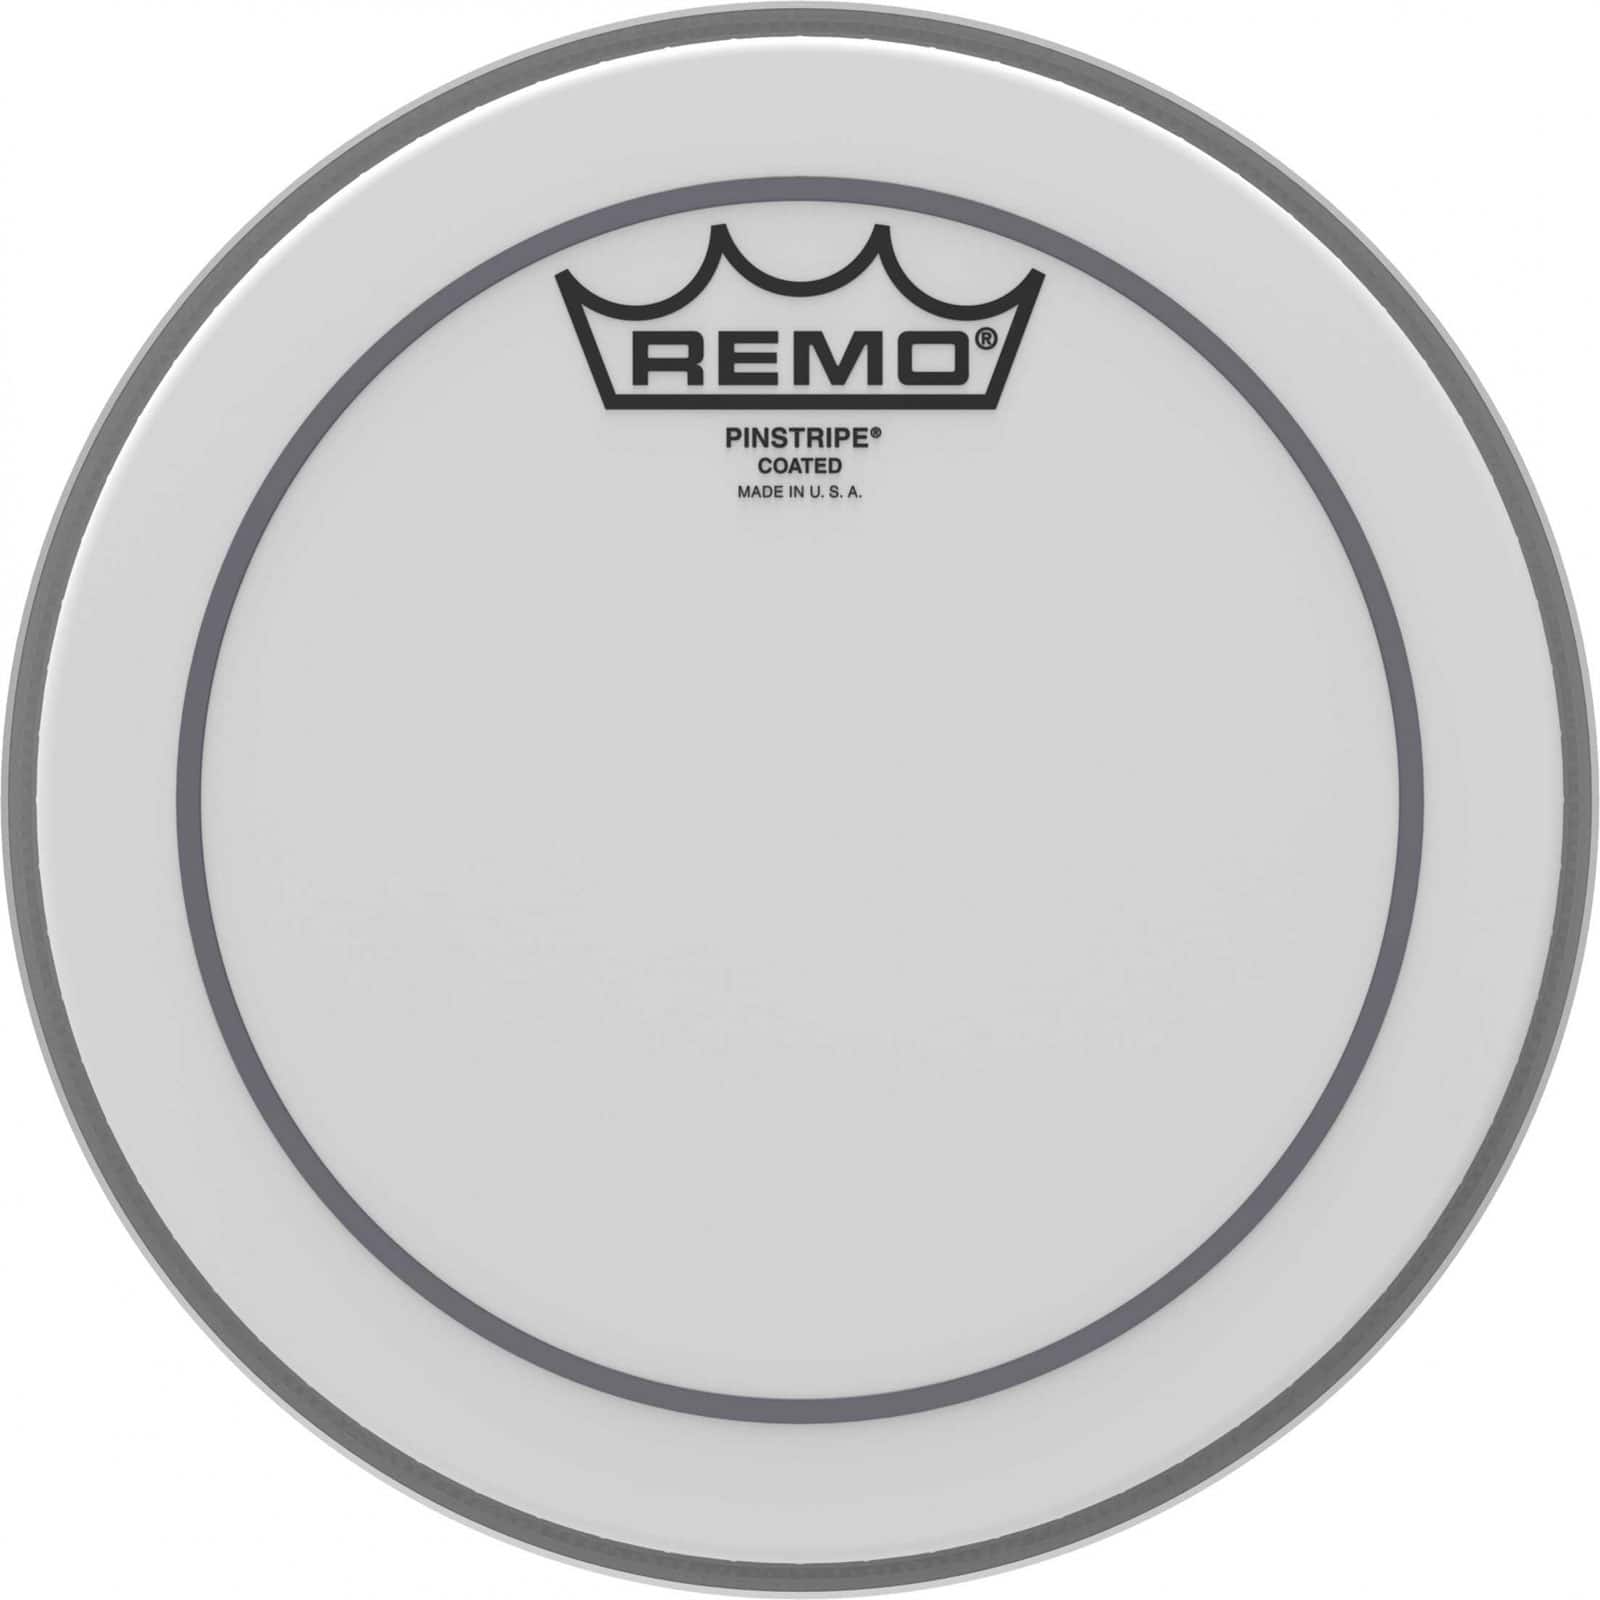 REMO PS-0108-00 PINSTRIPE SABLEE 8